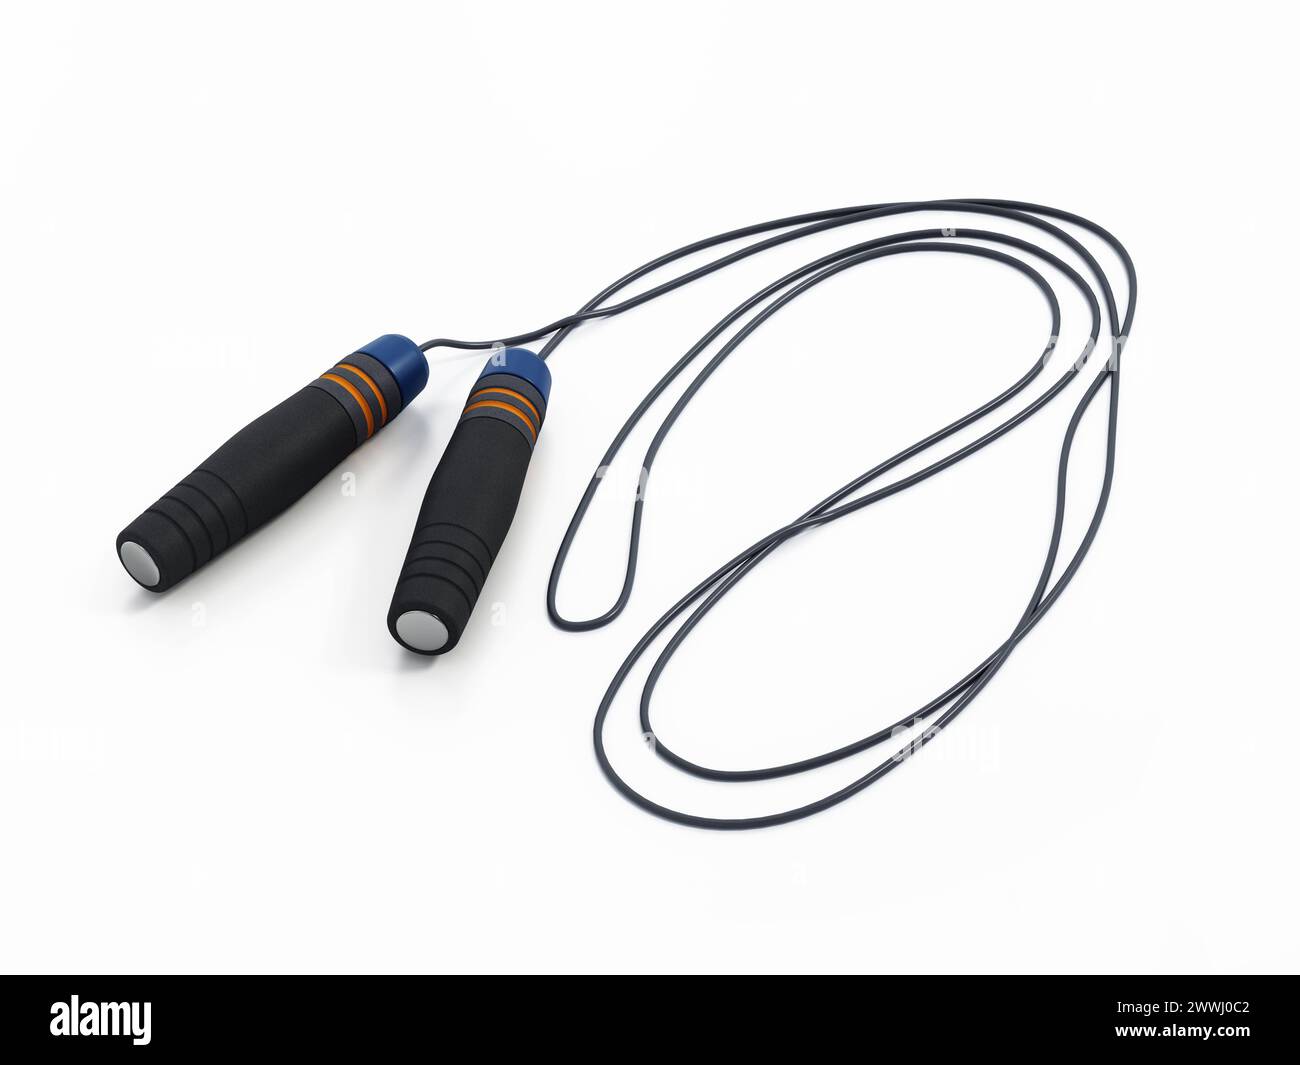 Professional jump rope isolated on white background. 3D illustration Professional jump rope isolated on white background Professional jump rope isolat Stock Photo